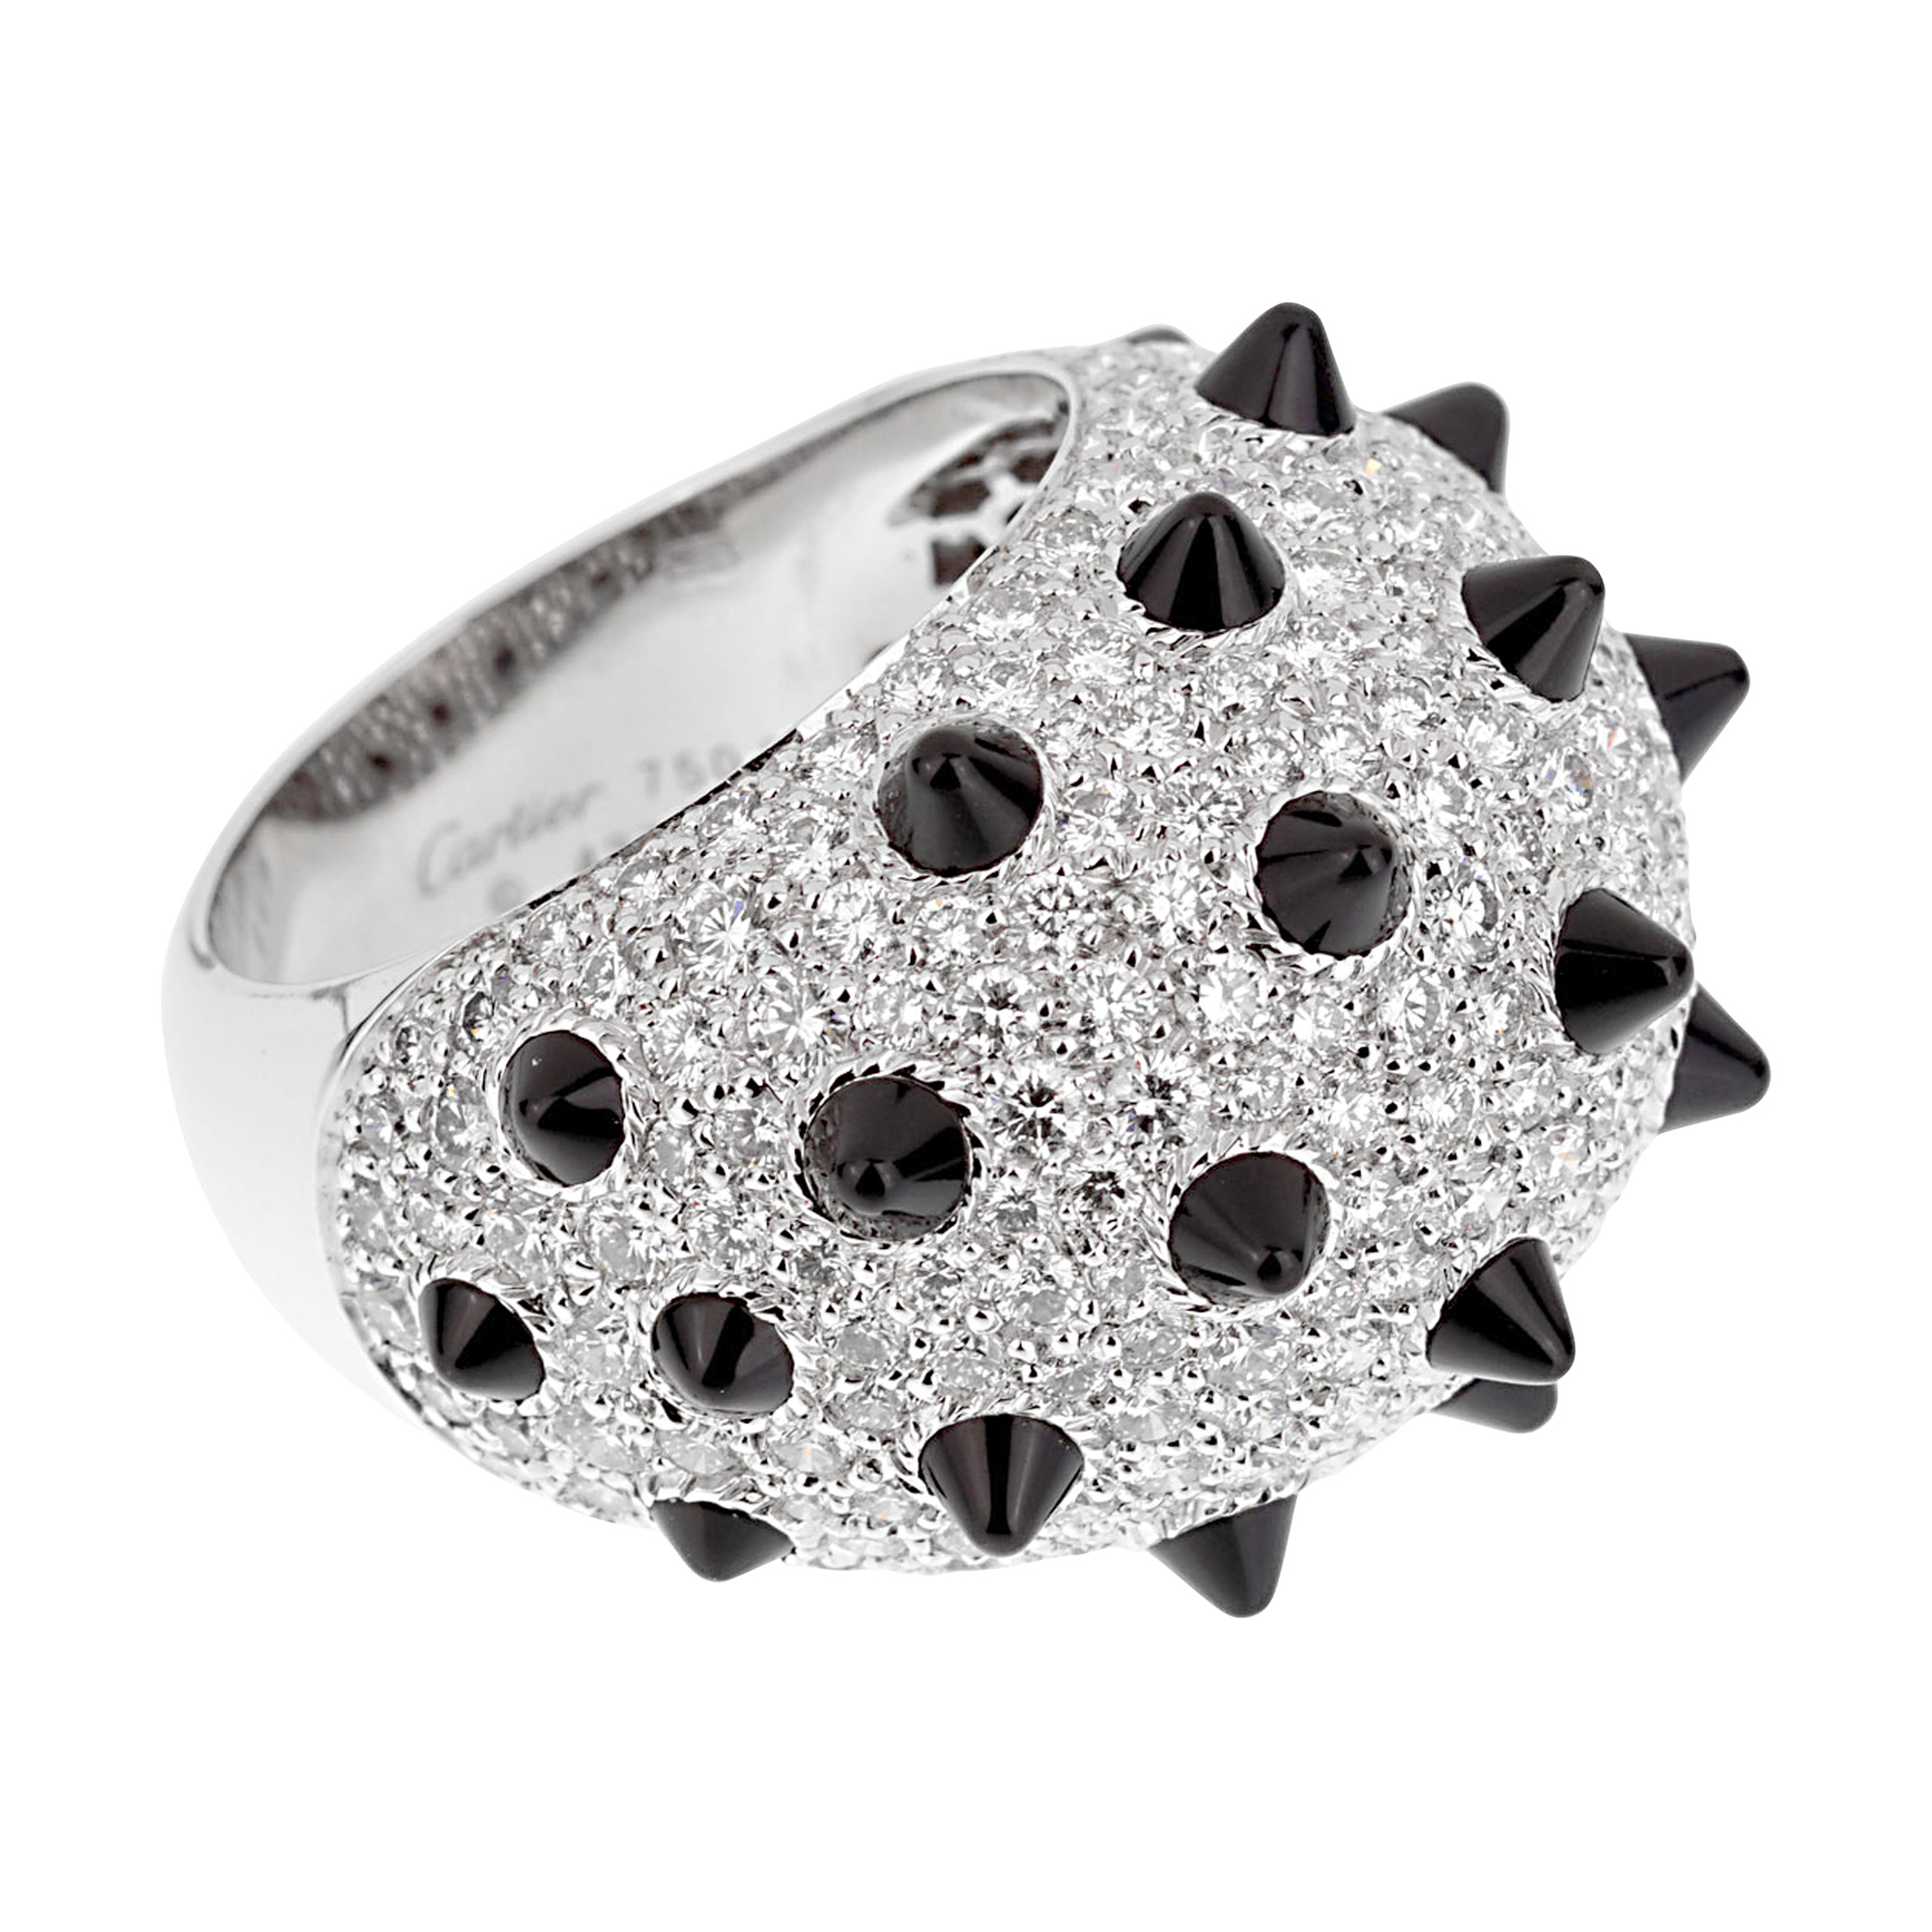 White gold diamond and onyx spike ring, Exquisite jewelry piece, Unique and elegant design, Sophistication meets edginess, 2000x2000 HD Phone